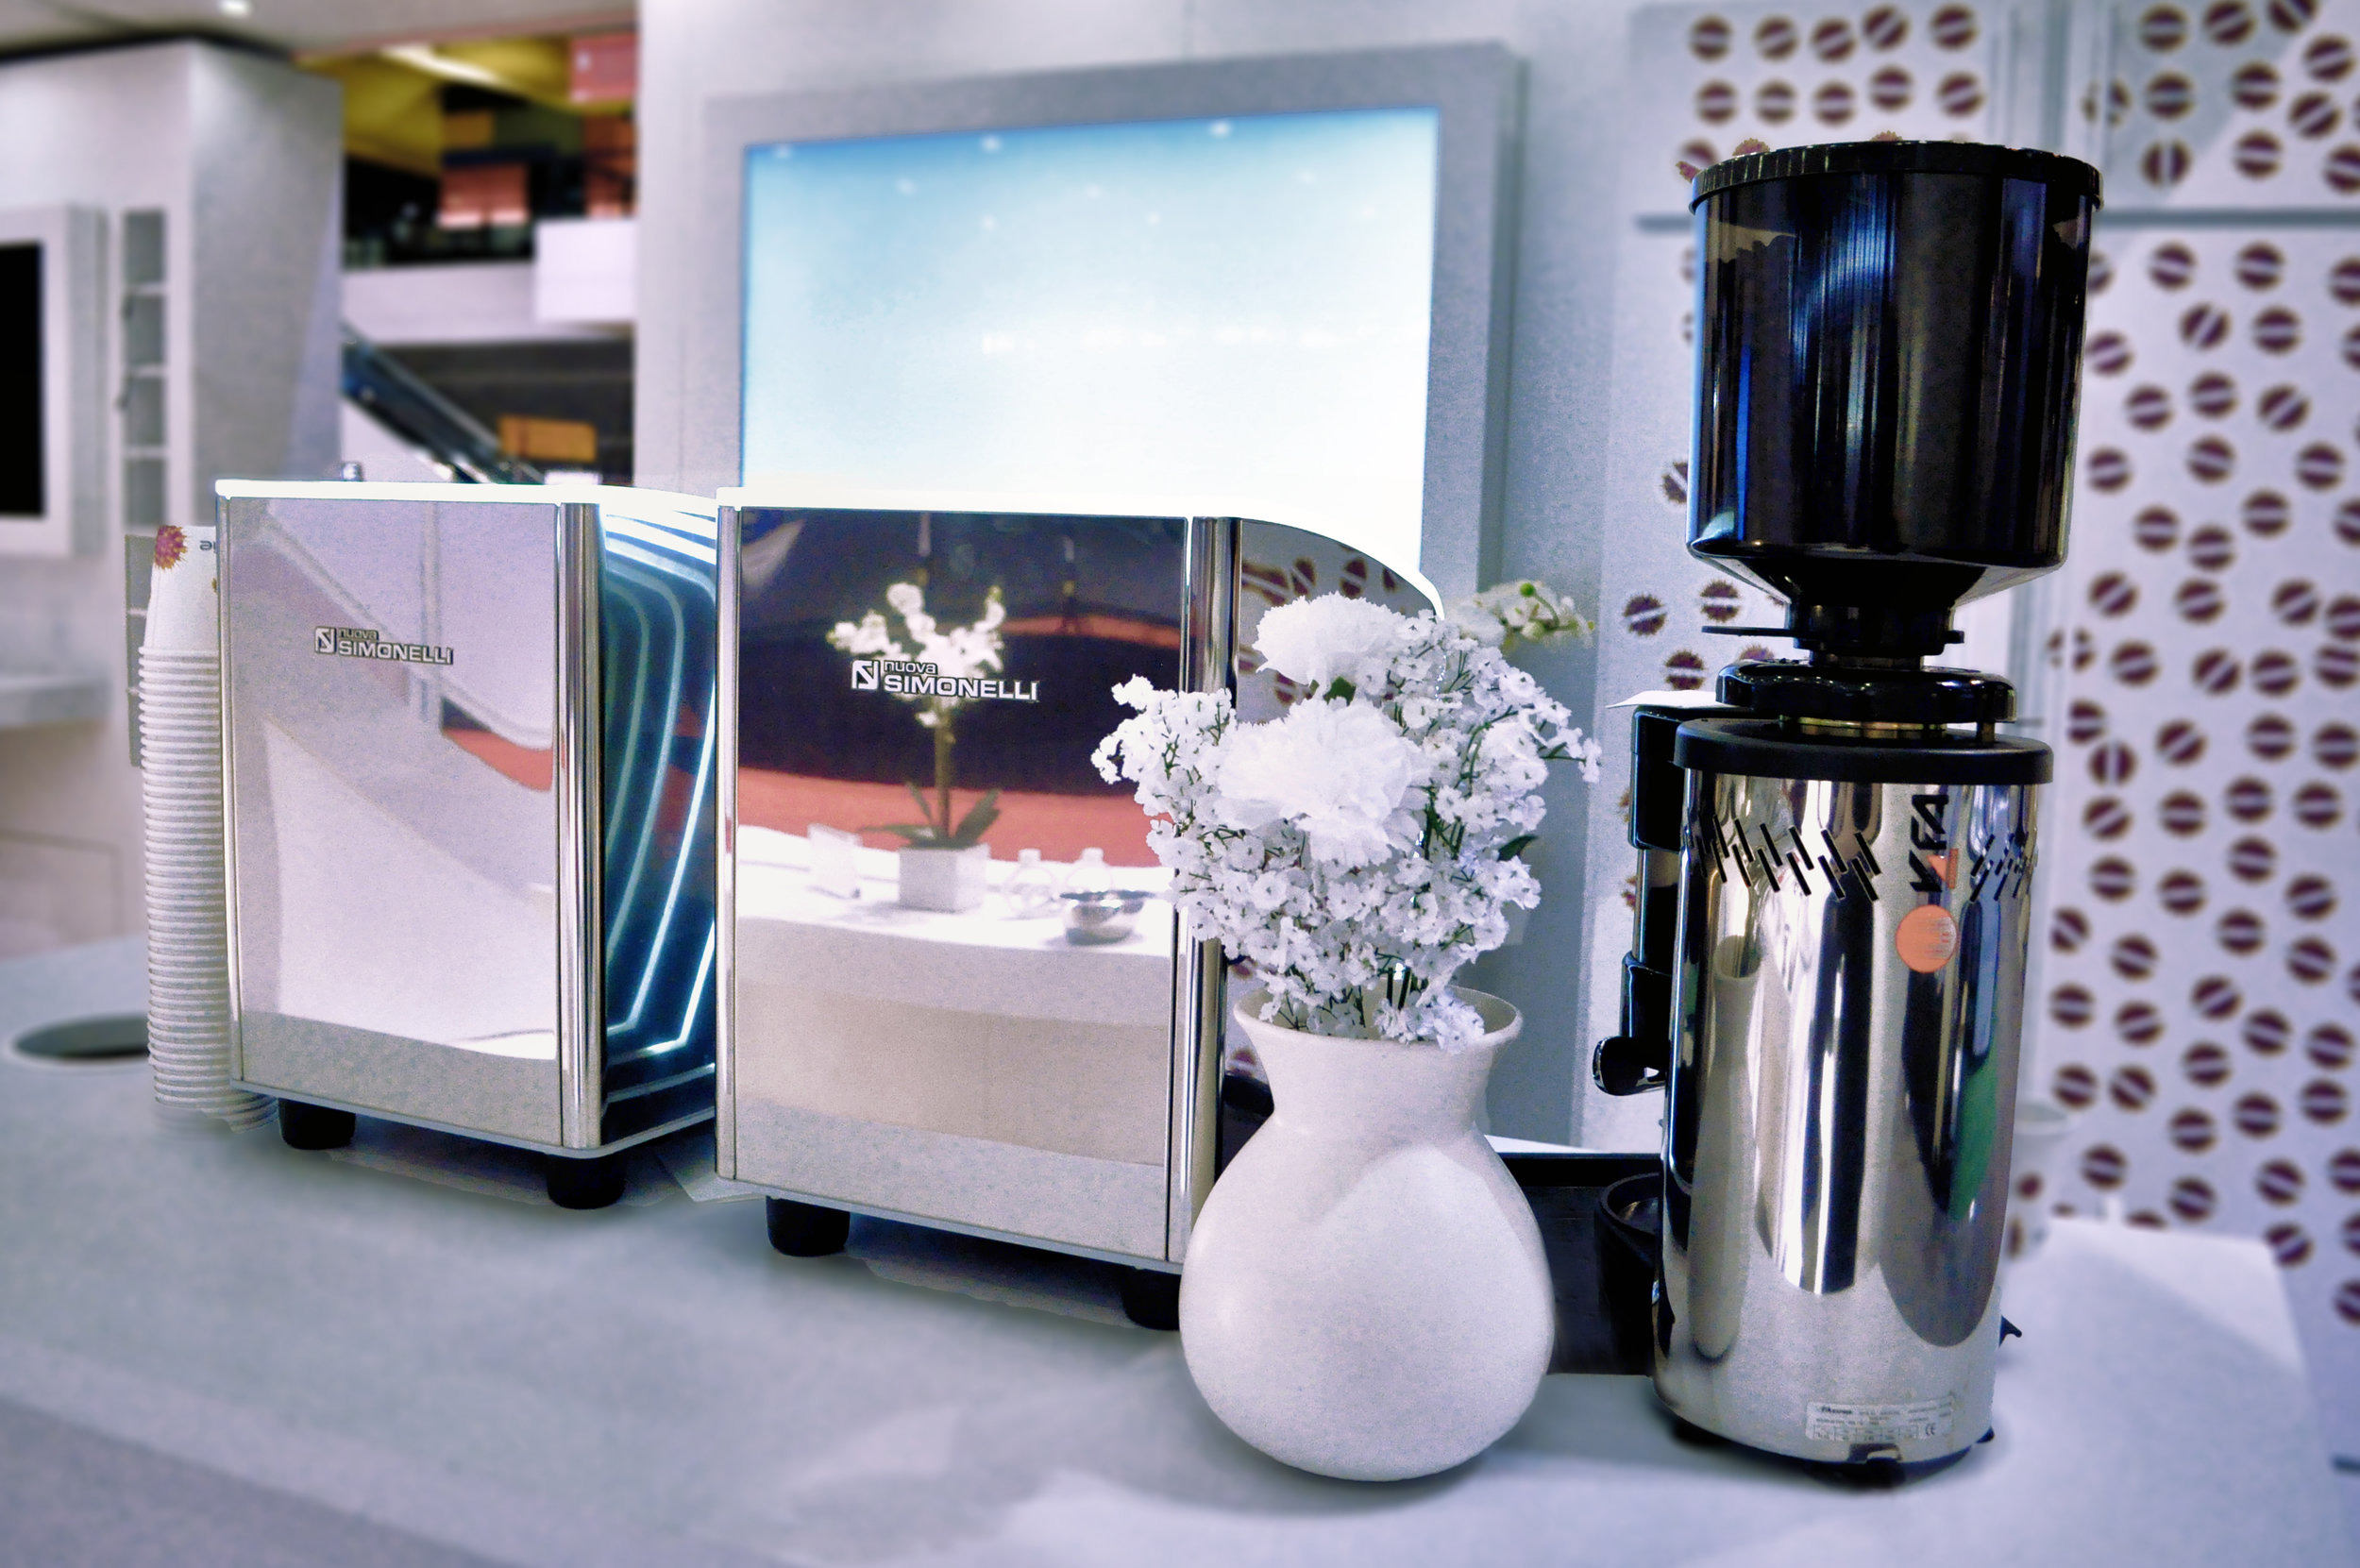 Duo Cappuccino Station.jpg